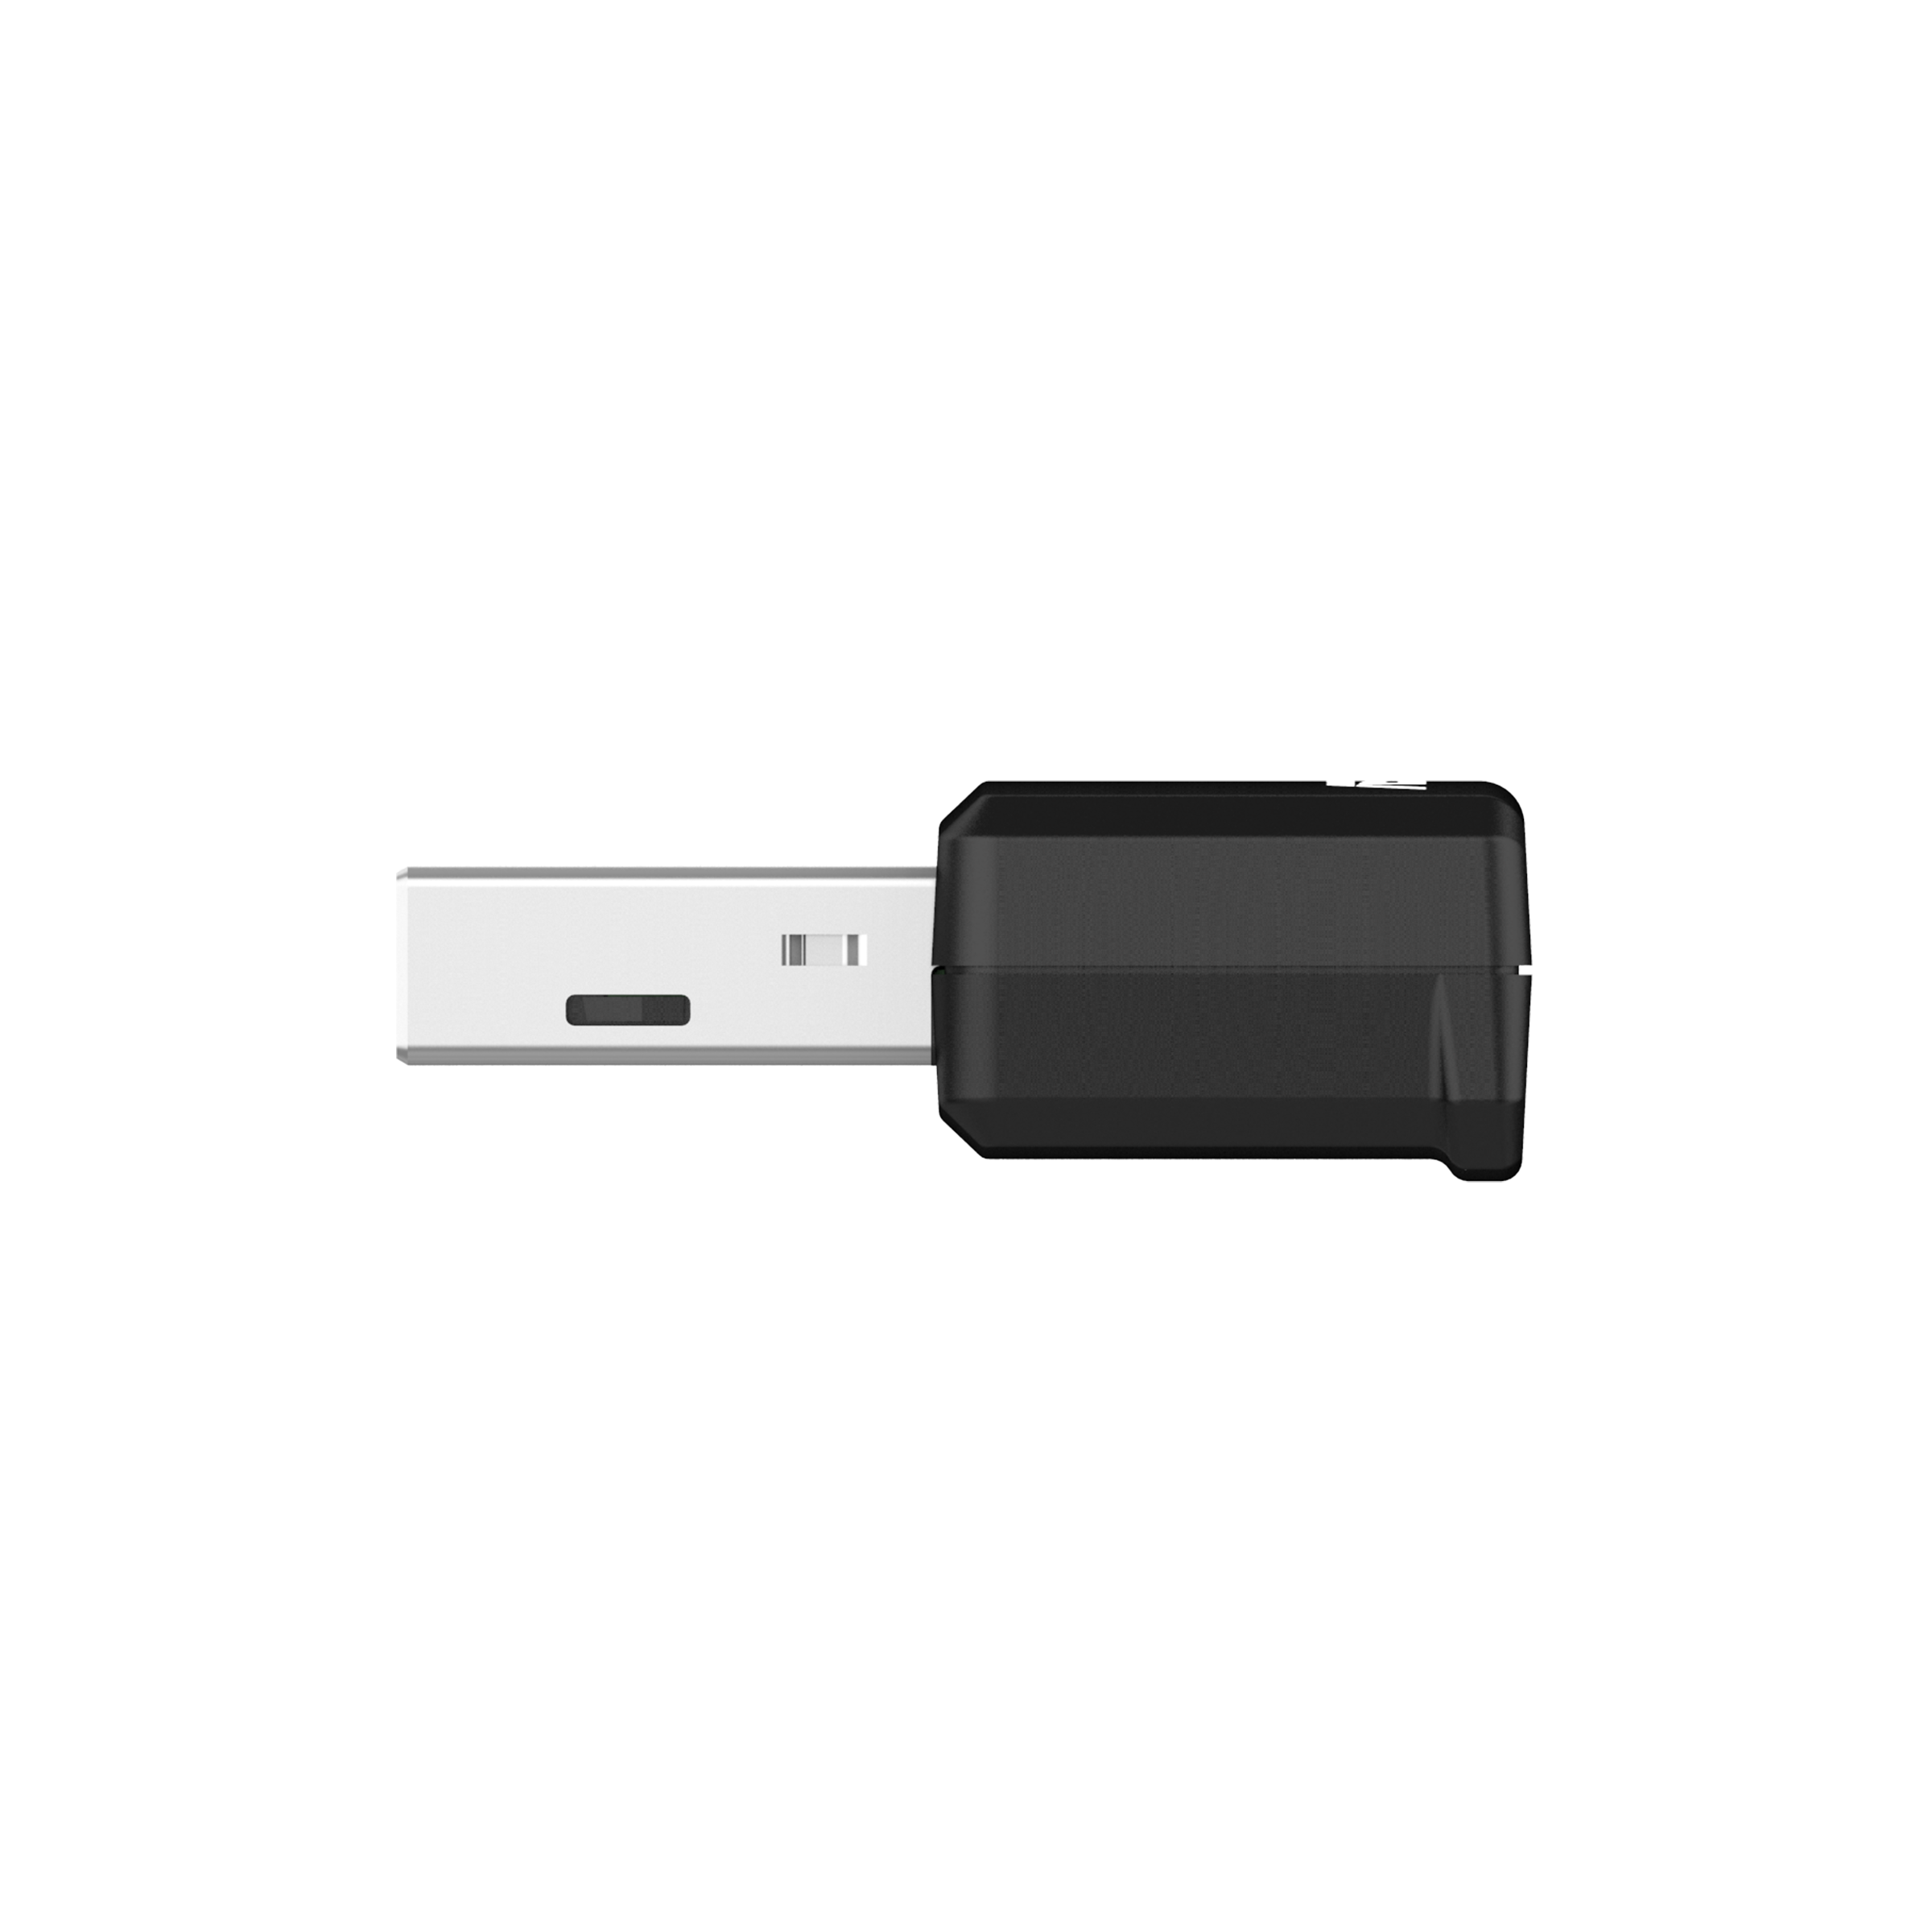 USB-AX56｜Wireless & Wired Adapters｜ASUS USA